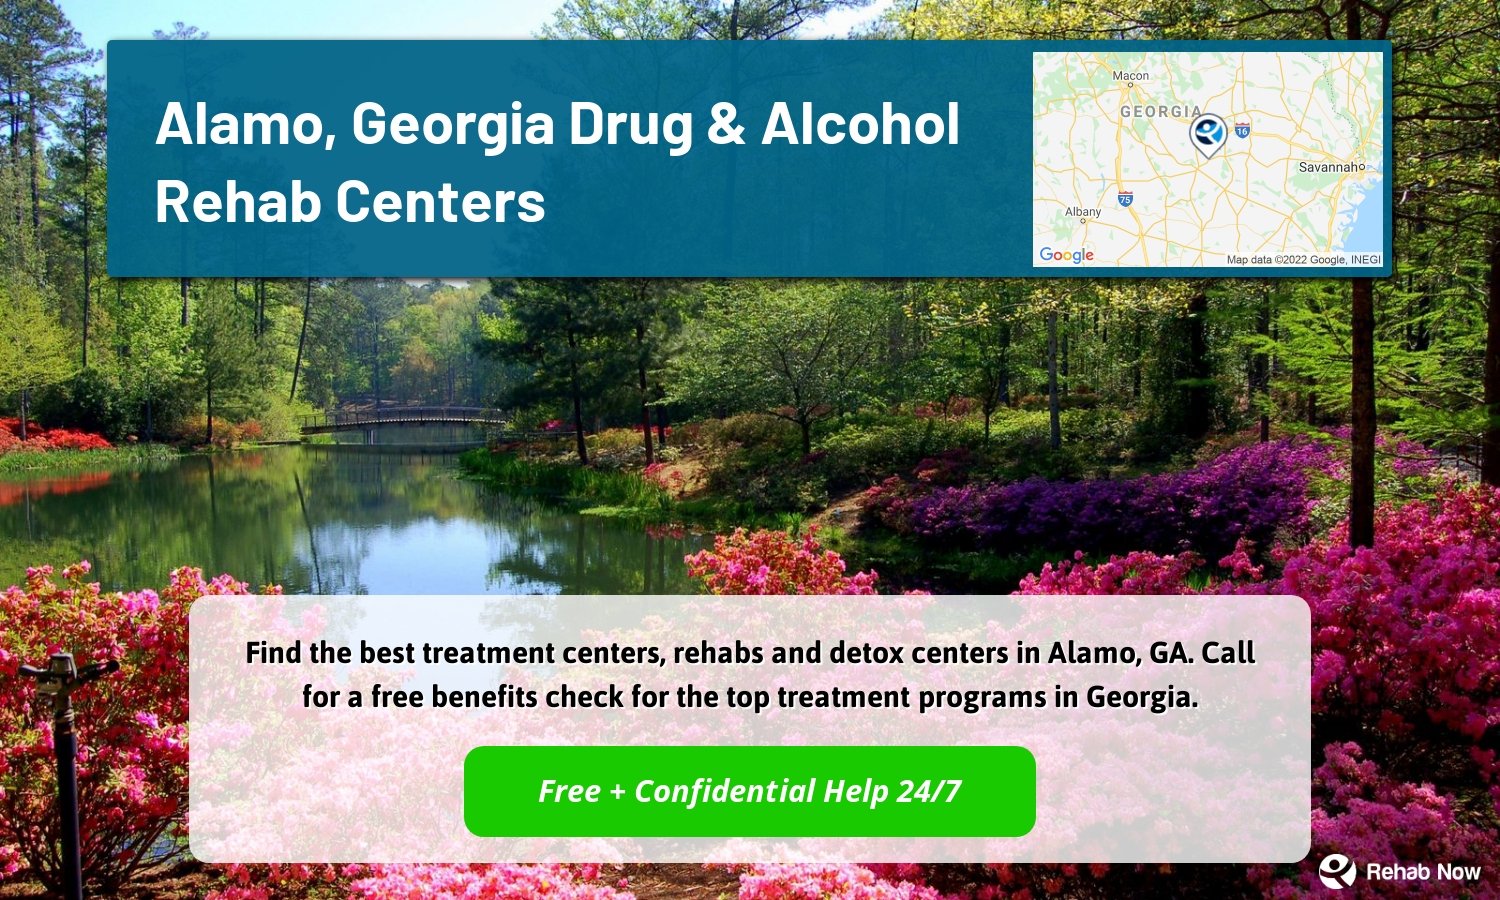 Find the best treatment centers, rehabs and detox centers in Alamo, GA. Call for a free benefits check for the top treatment programs in Georgia.